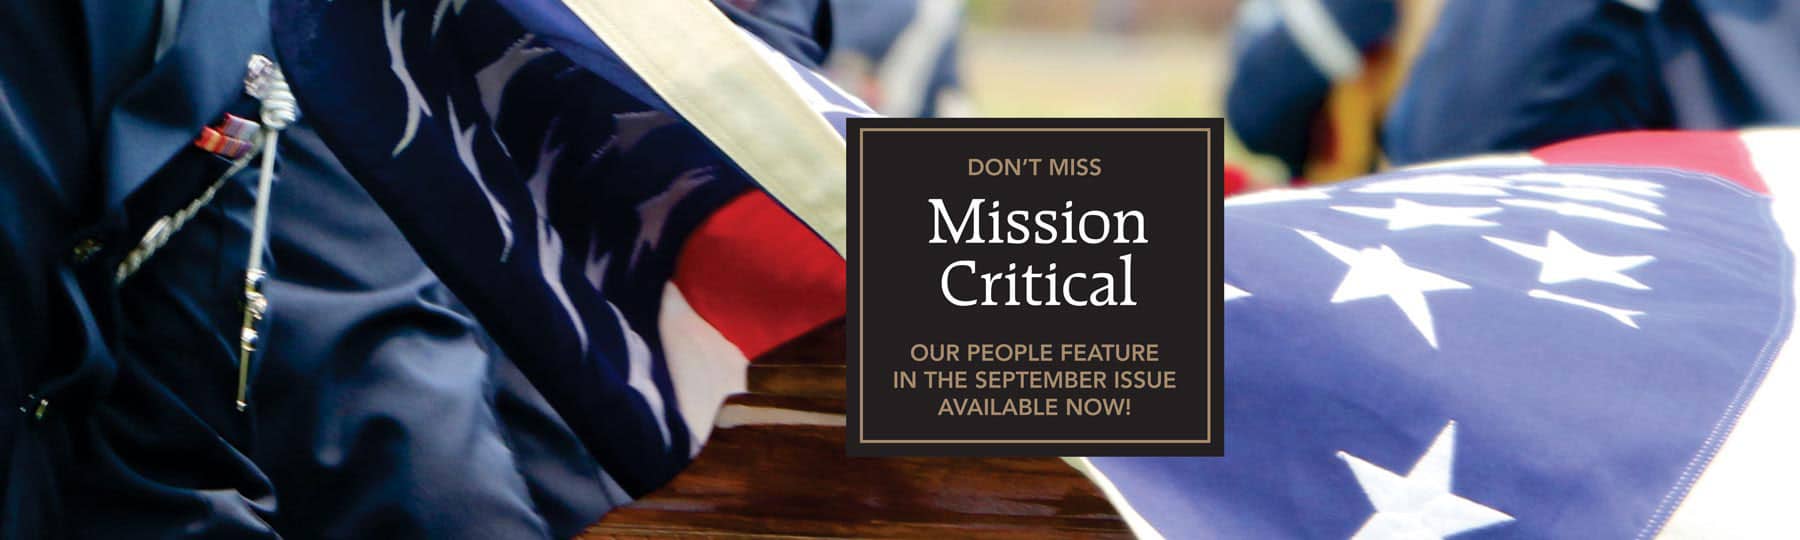 Don't Miss Mission Critical, our people feature in the September issue available now!